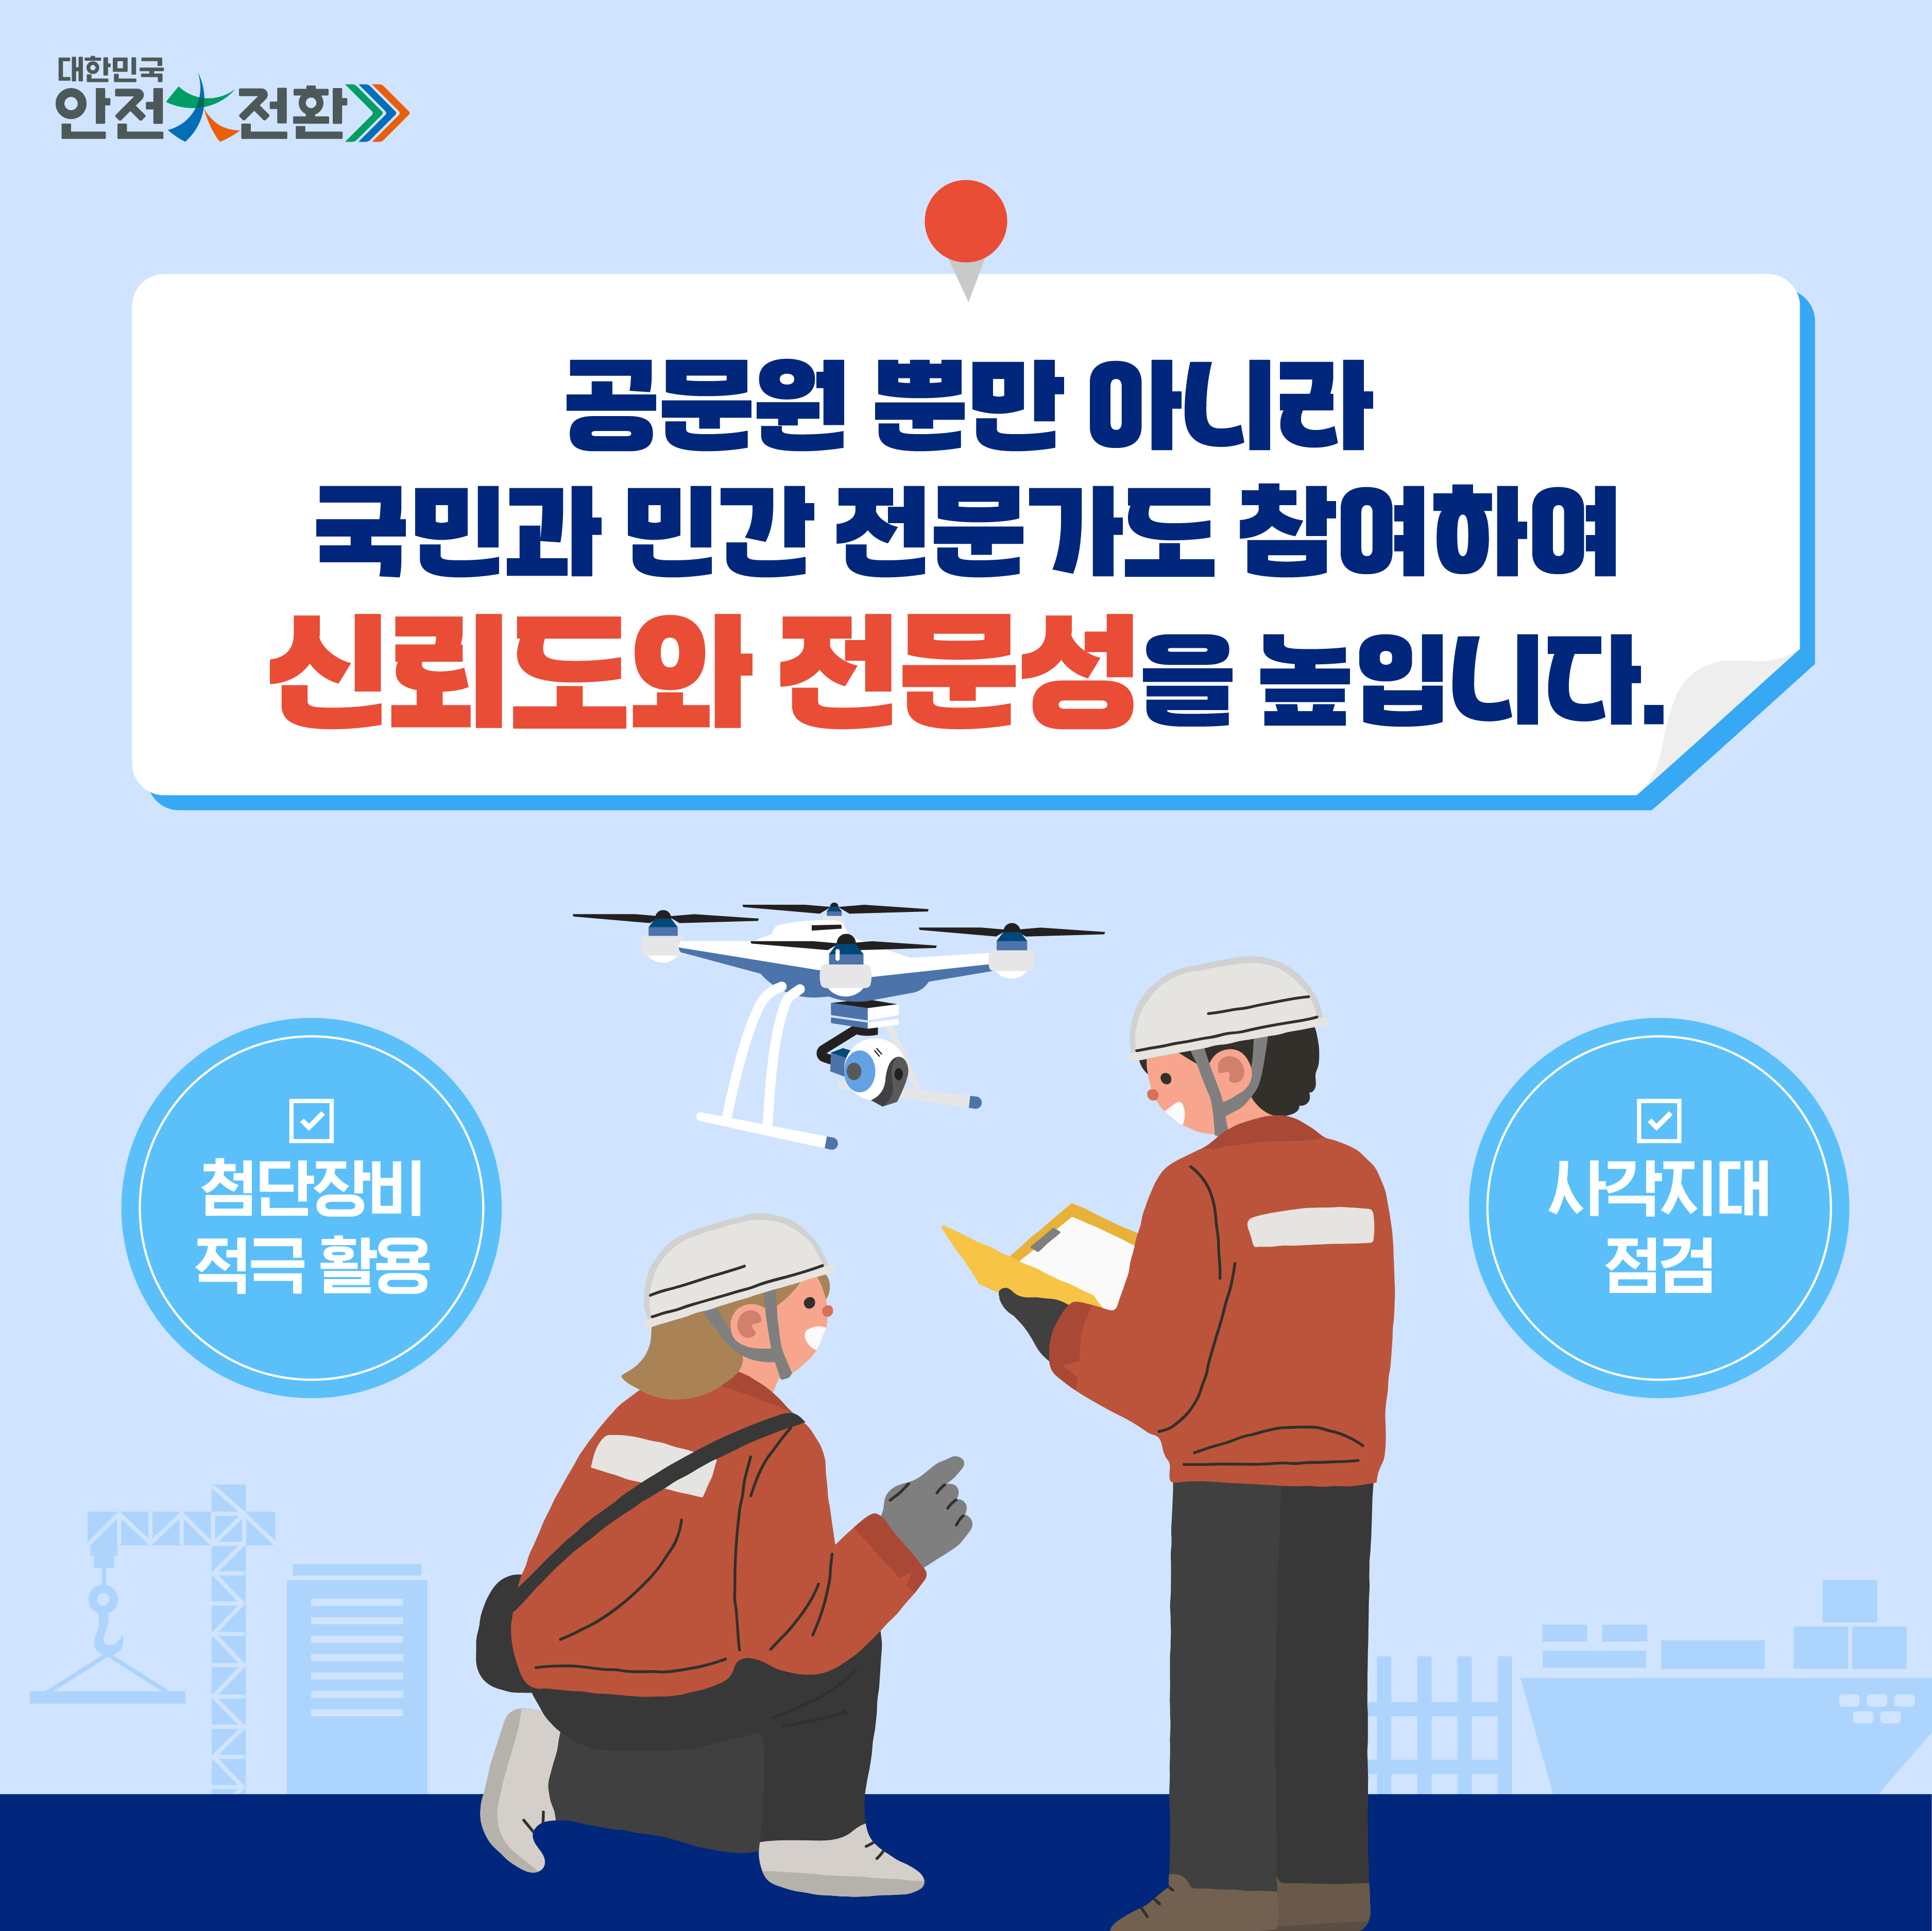 https://www.komsa.or.kr/kor/;jsessionid=A3A24F5A92ACE27AE47D4A11FCE0EAC7